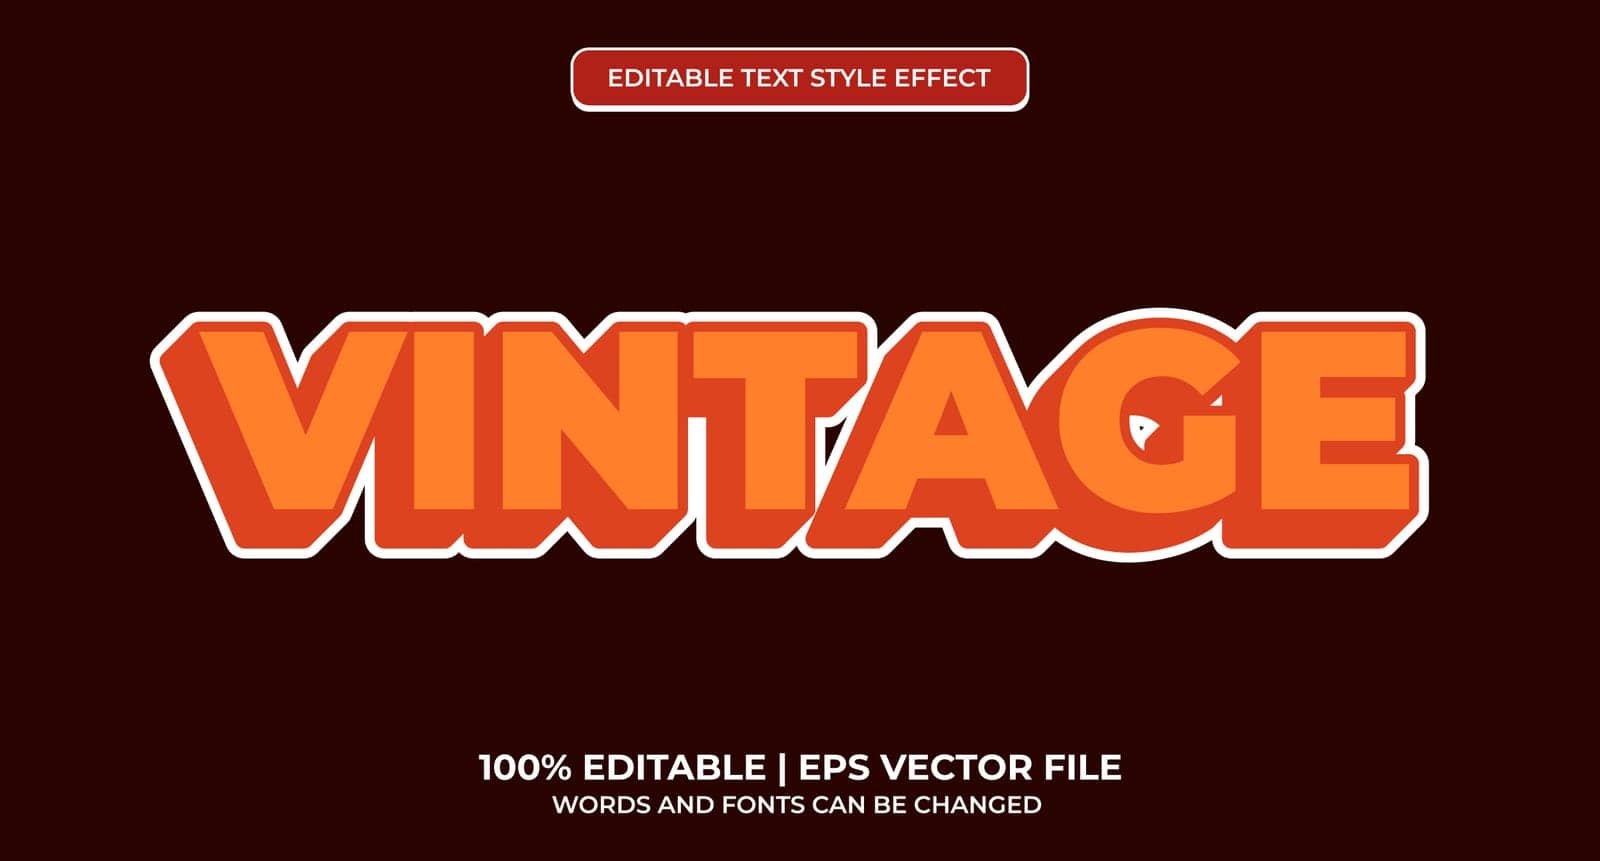 Retro, vintage text effect, editable 70s and 80s text style. Editable text effect by Aozora